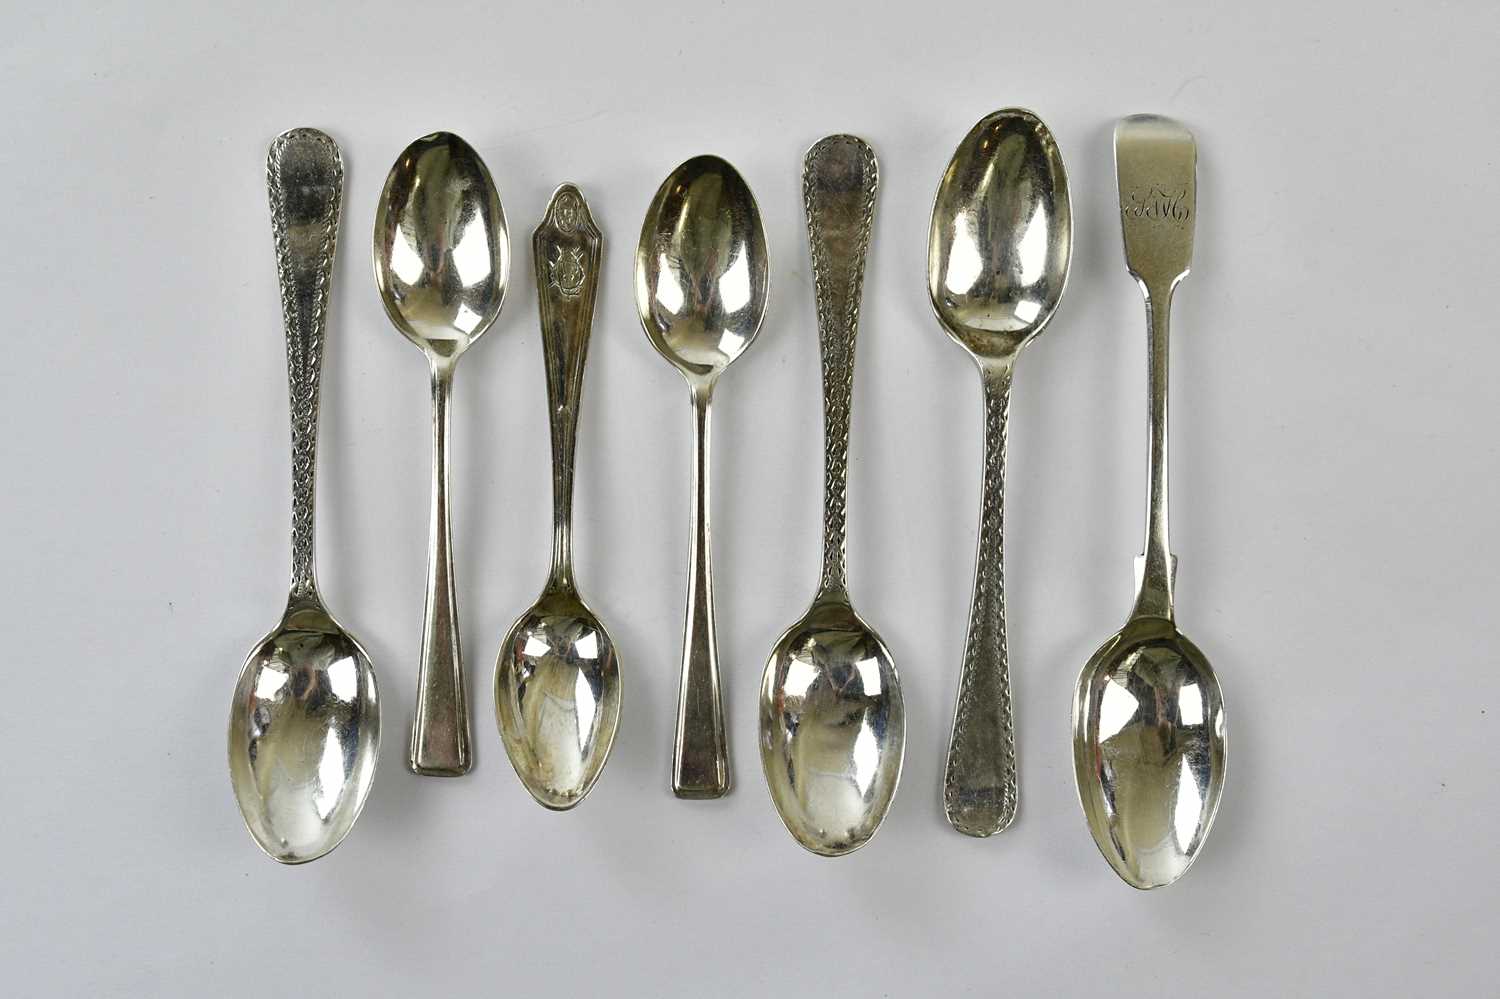 JOSEPH RODGERS & SONS; three Edward VII hallmarked silver teaspoons, Sheffield 1908, together with